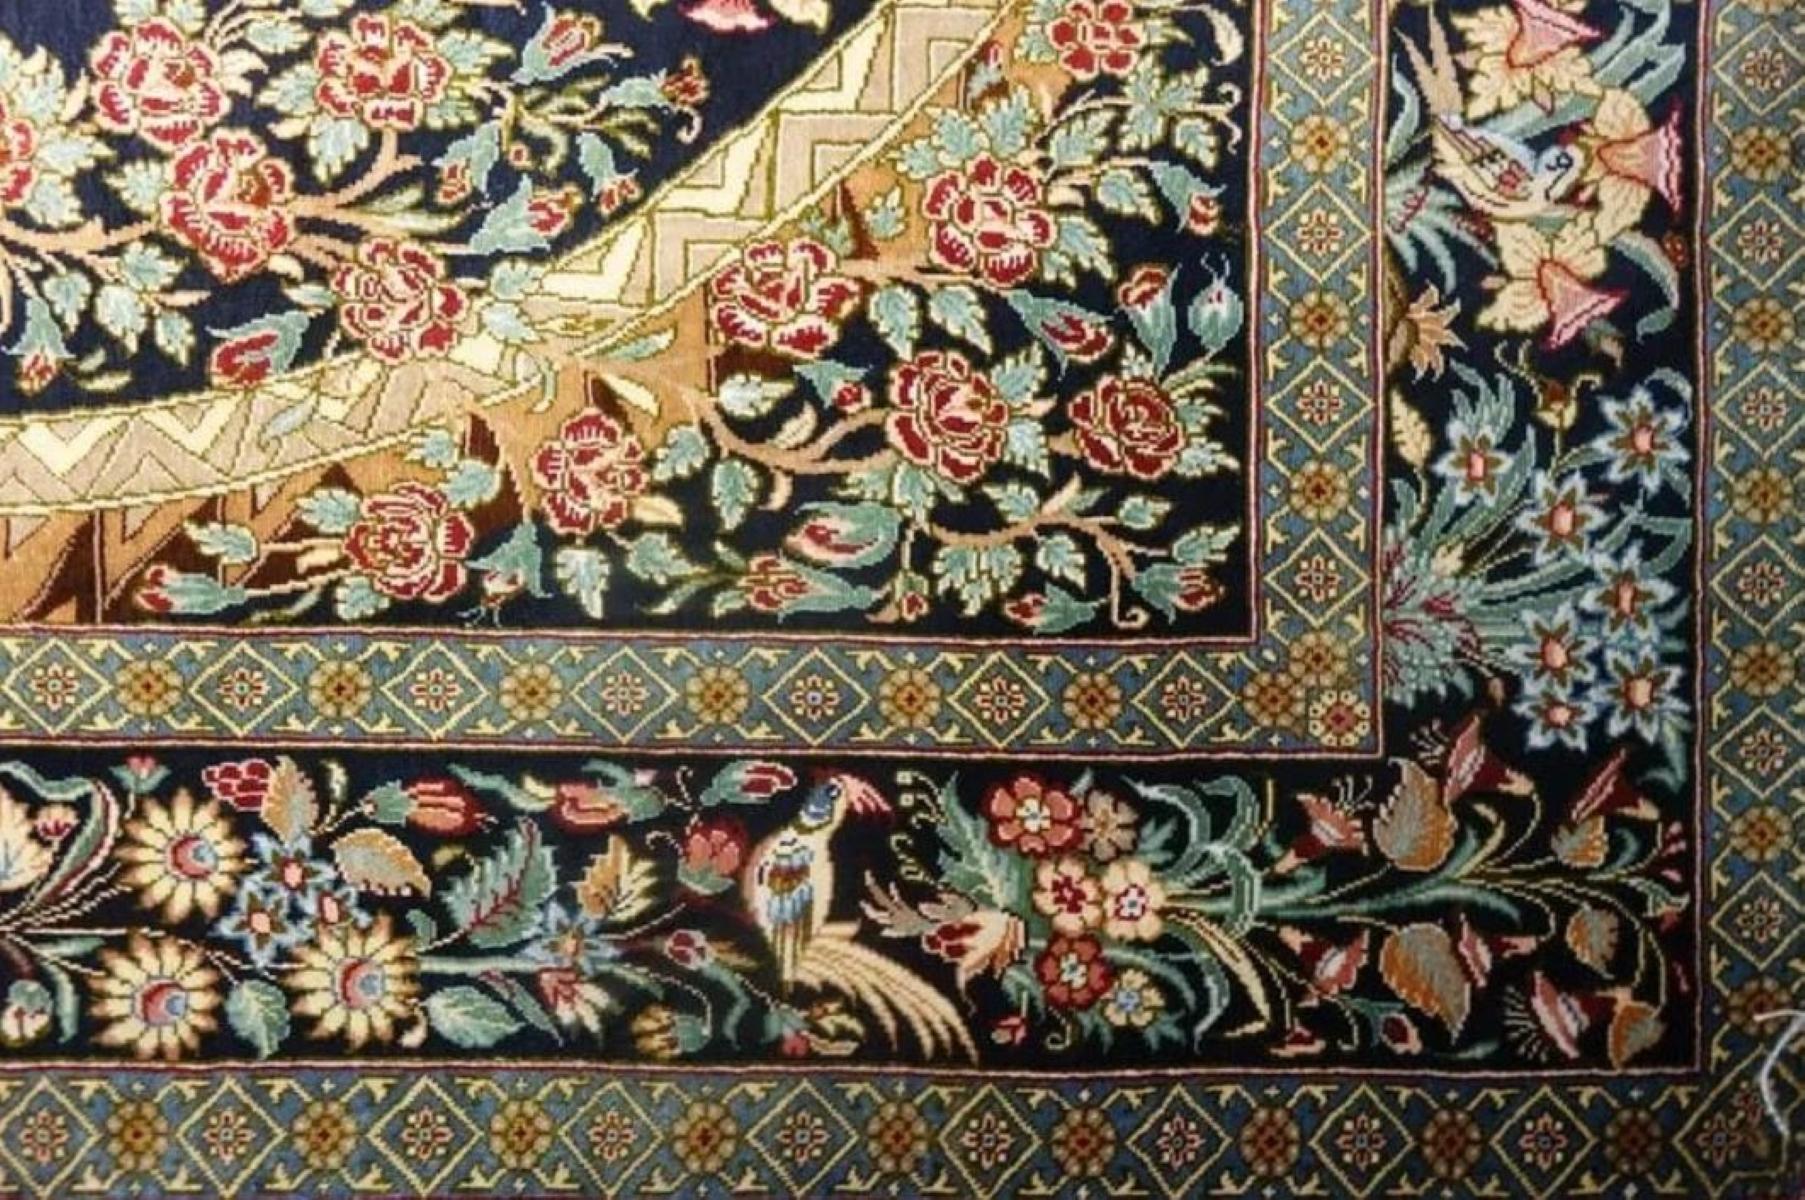 Very fine Persian Rug Qum 700 Knots per inch, Size 5 x 3.3 Iran Qum Motevaseli  Silk and Silk foundation. Around 1,600,000 knots tied by hand one by one. It takes a year to complete this piece of art.